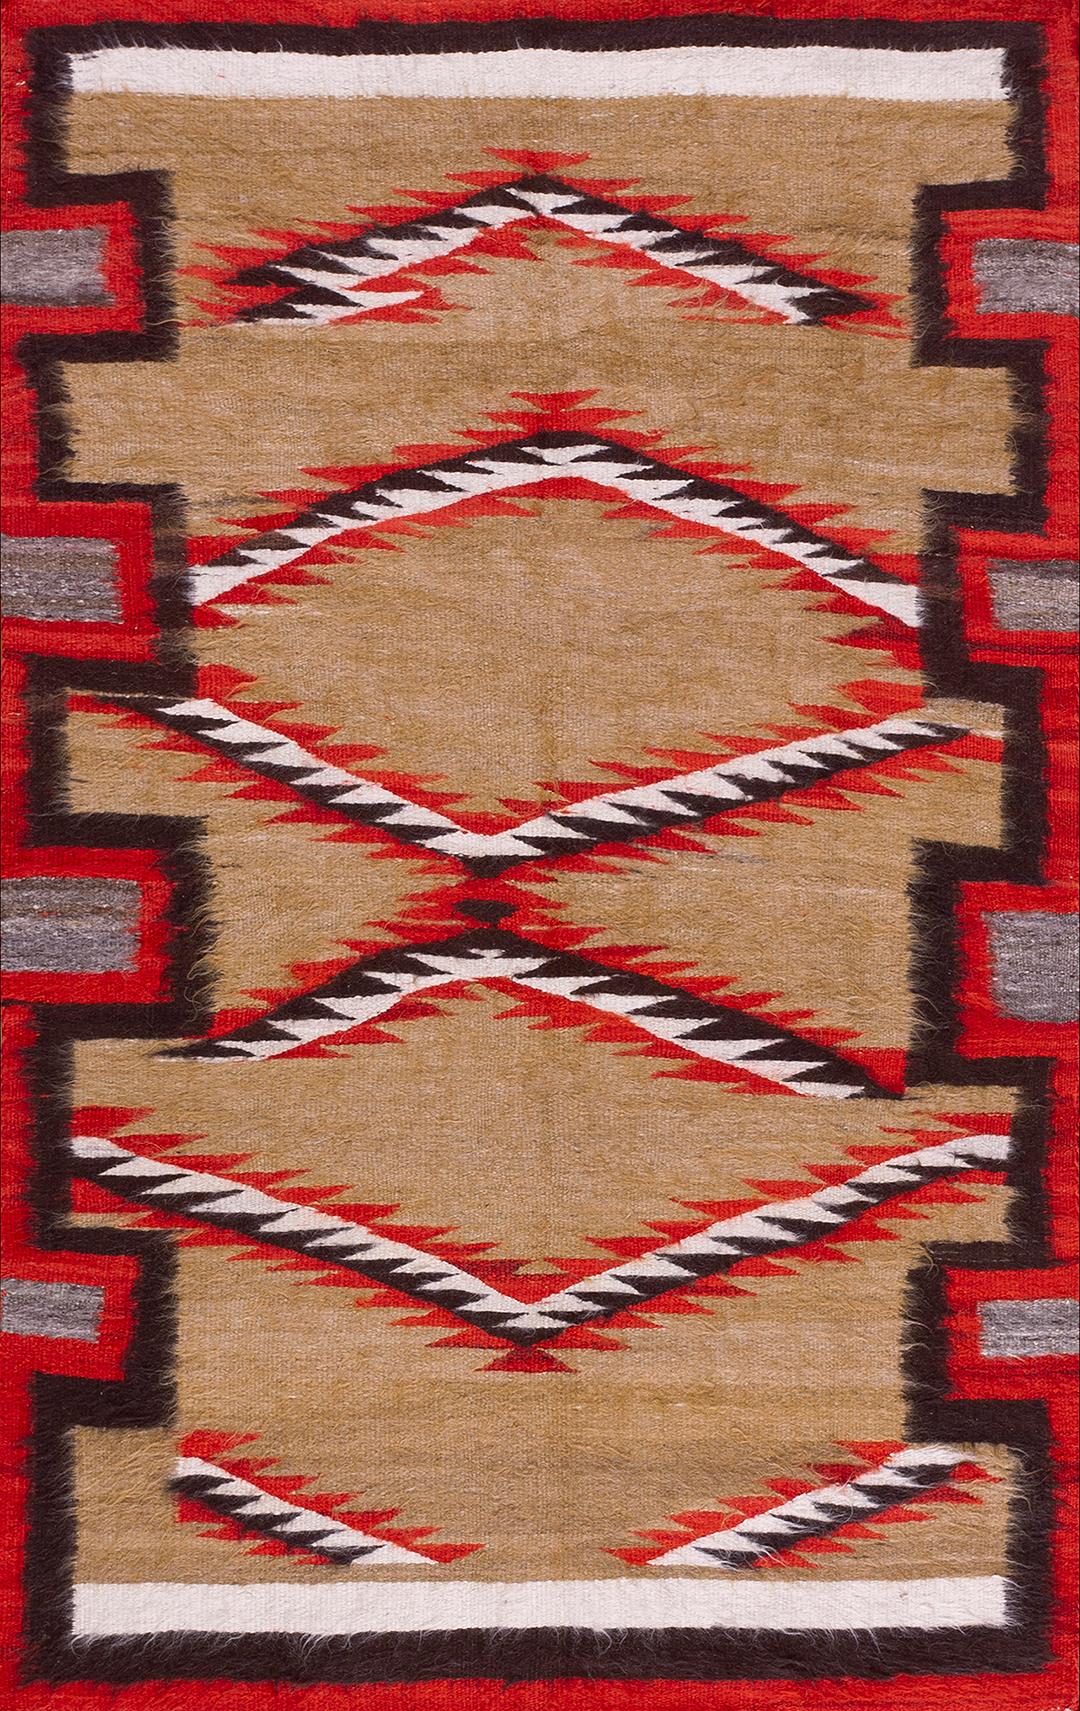 Early 20th Century American Navajo Rug (4'  x 6' 2" - 122 x 188 cm ) For Sale